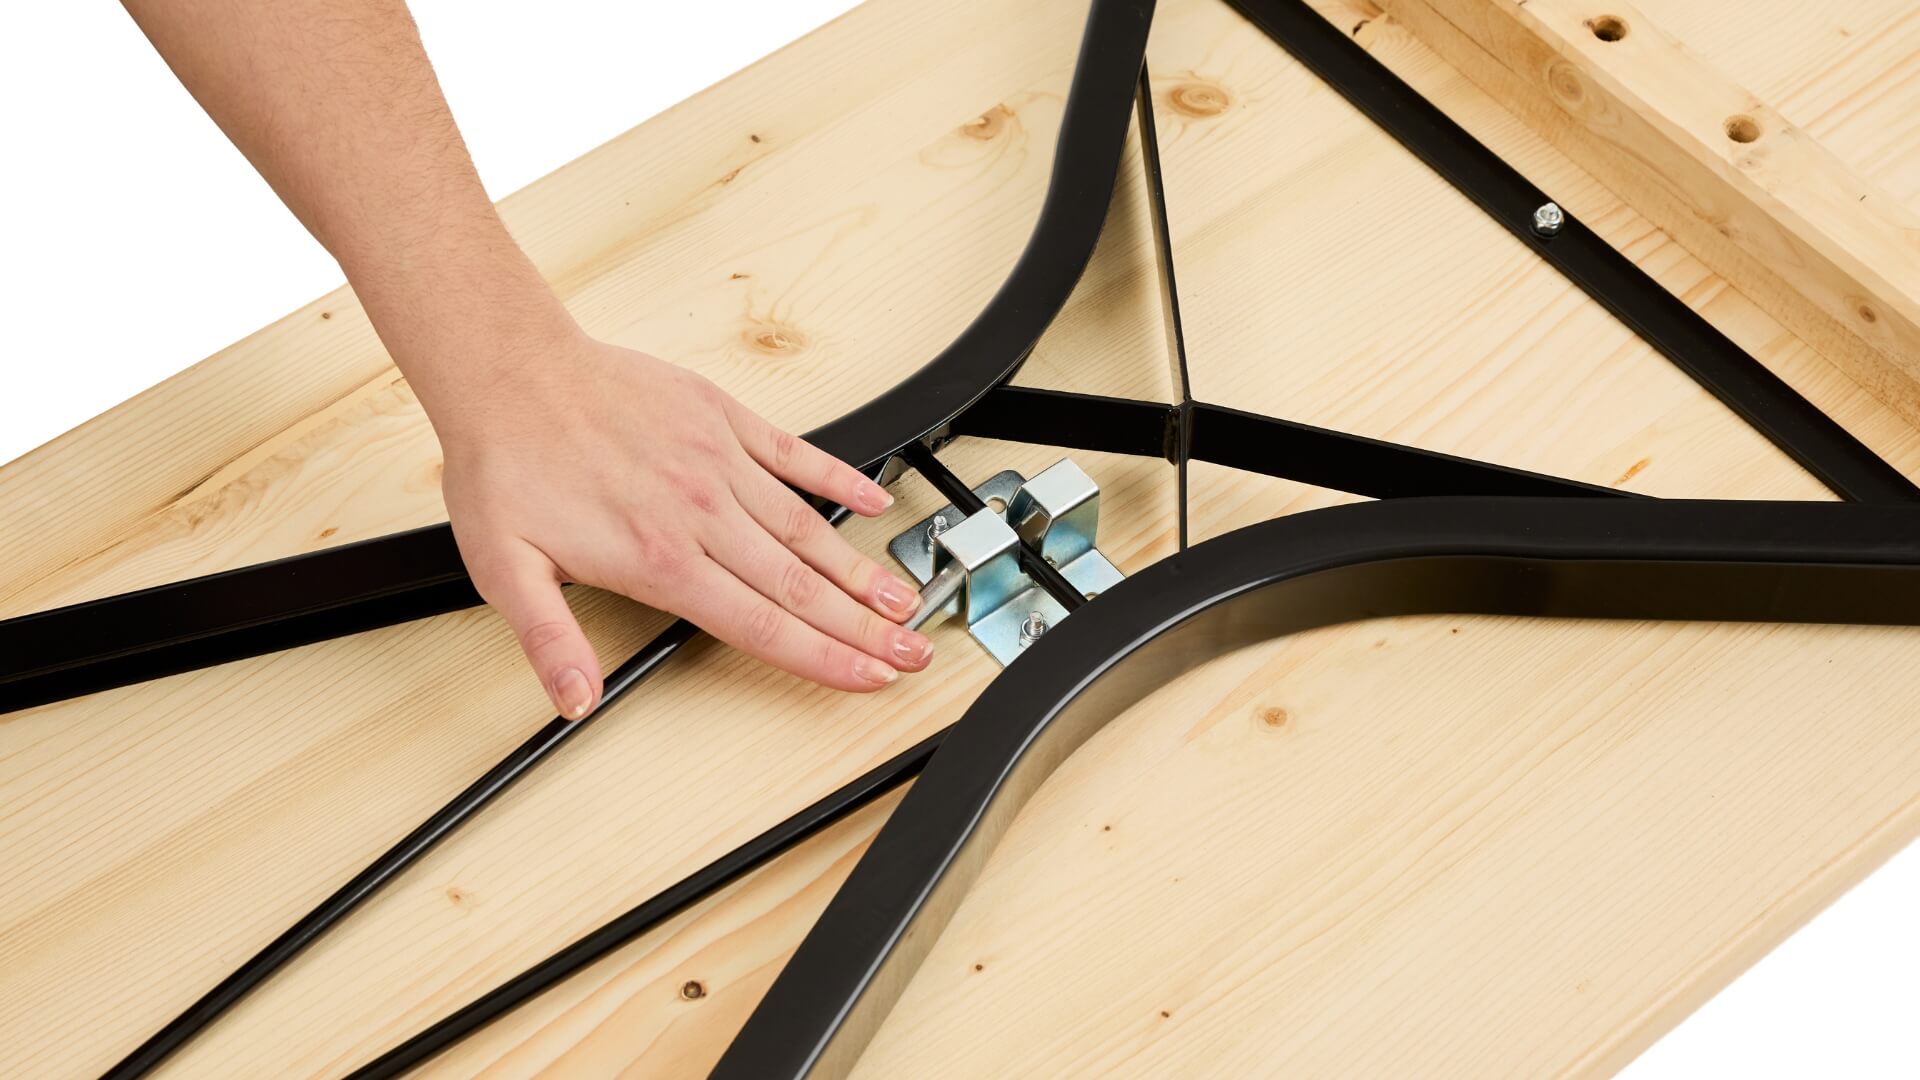 A hand pushes down the lever of the folding furniture lock to assemble the beer garden table set with legroom.